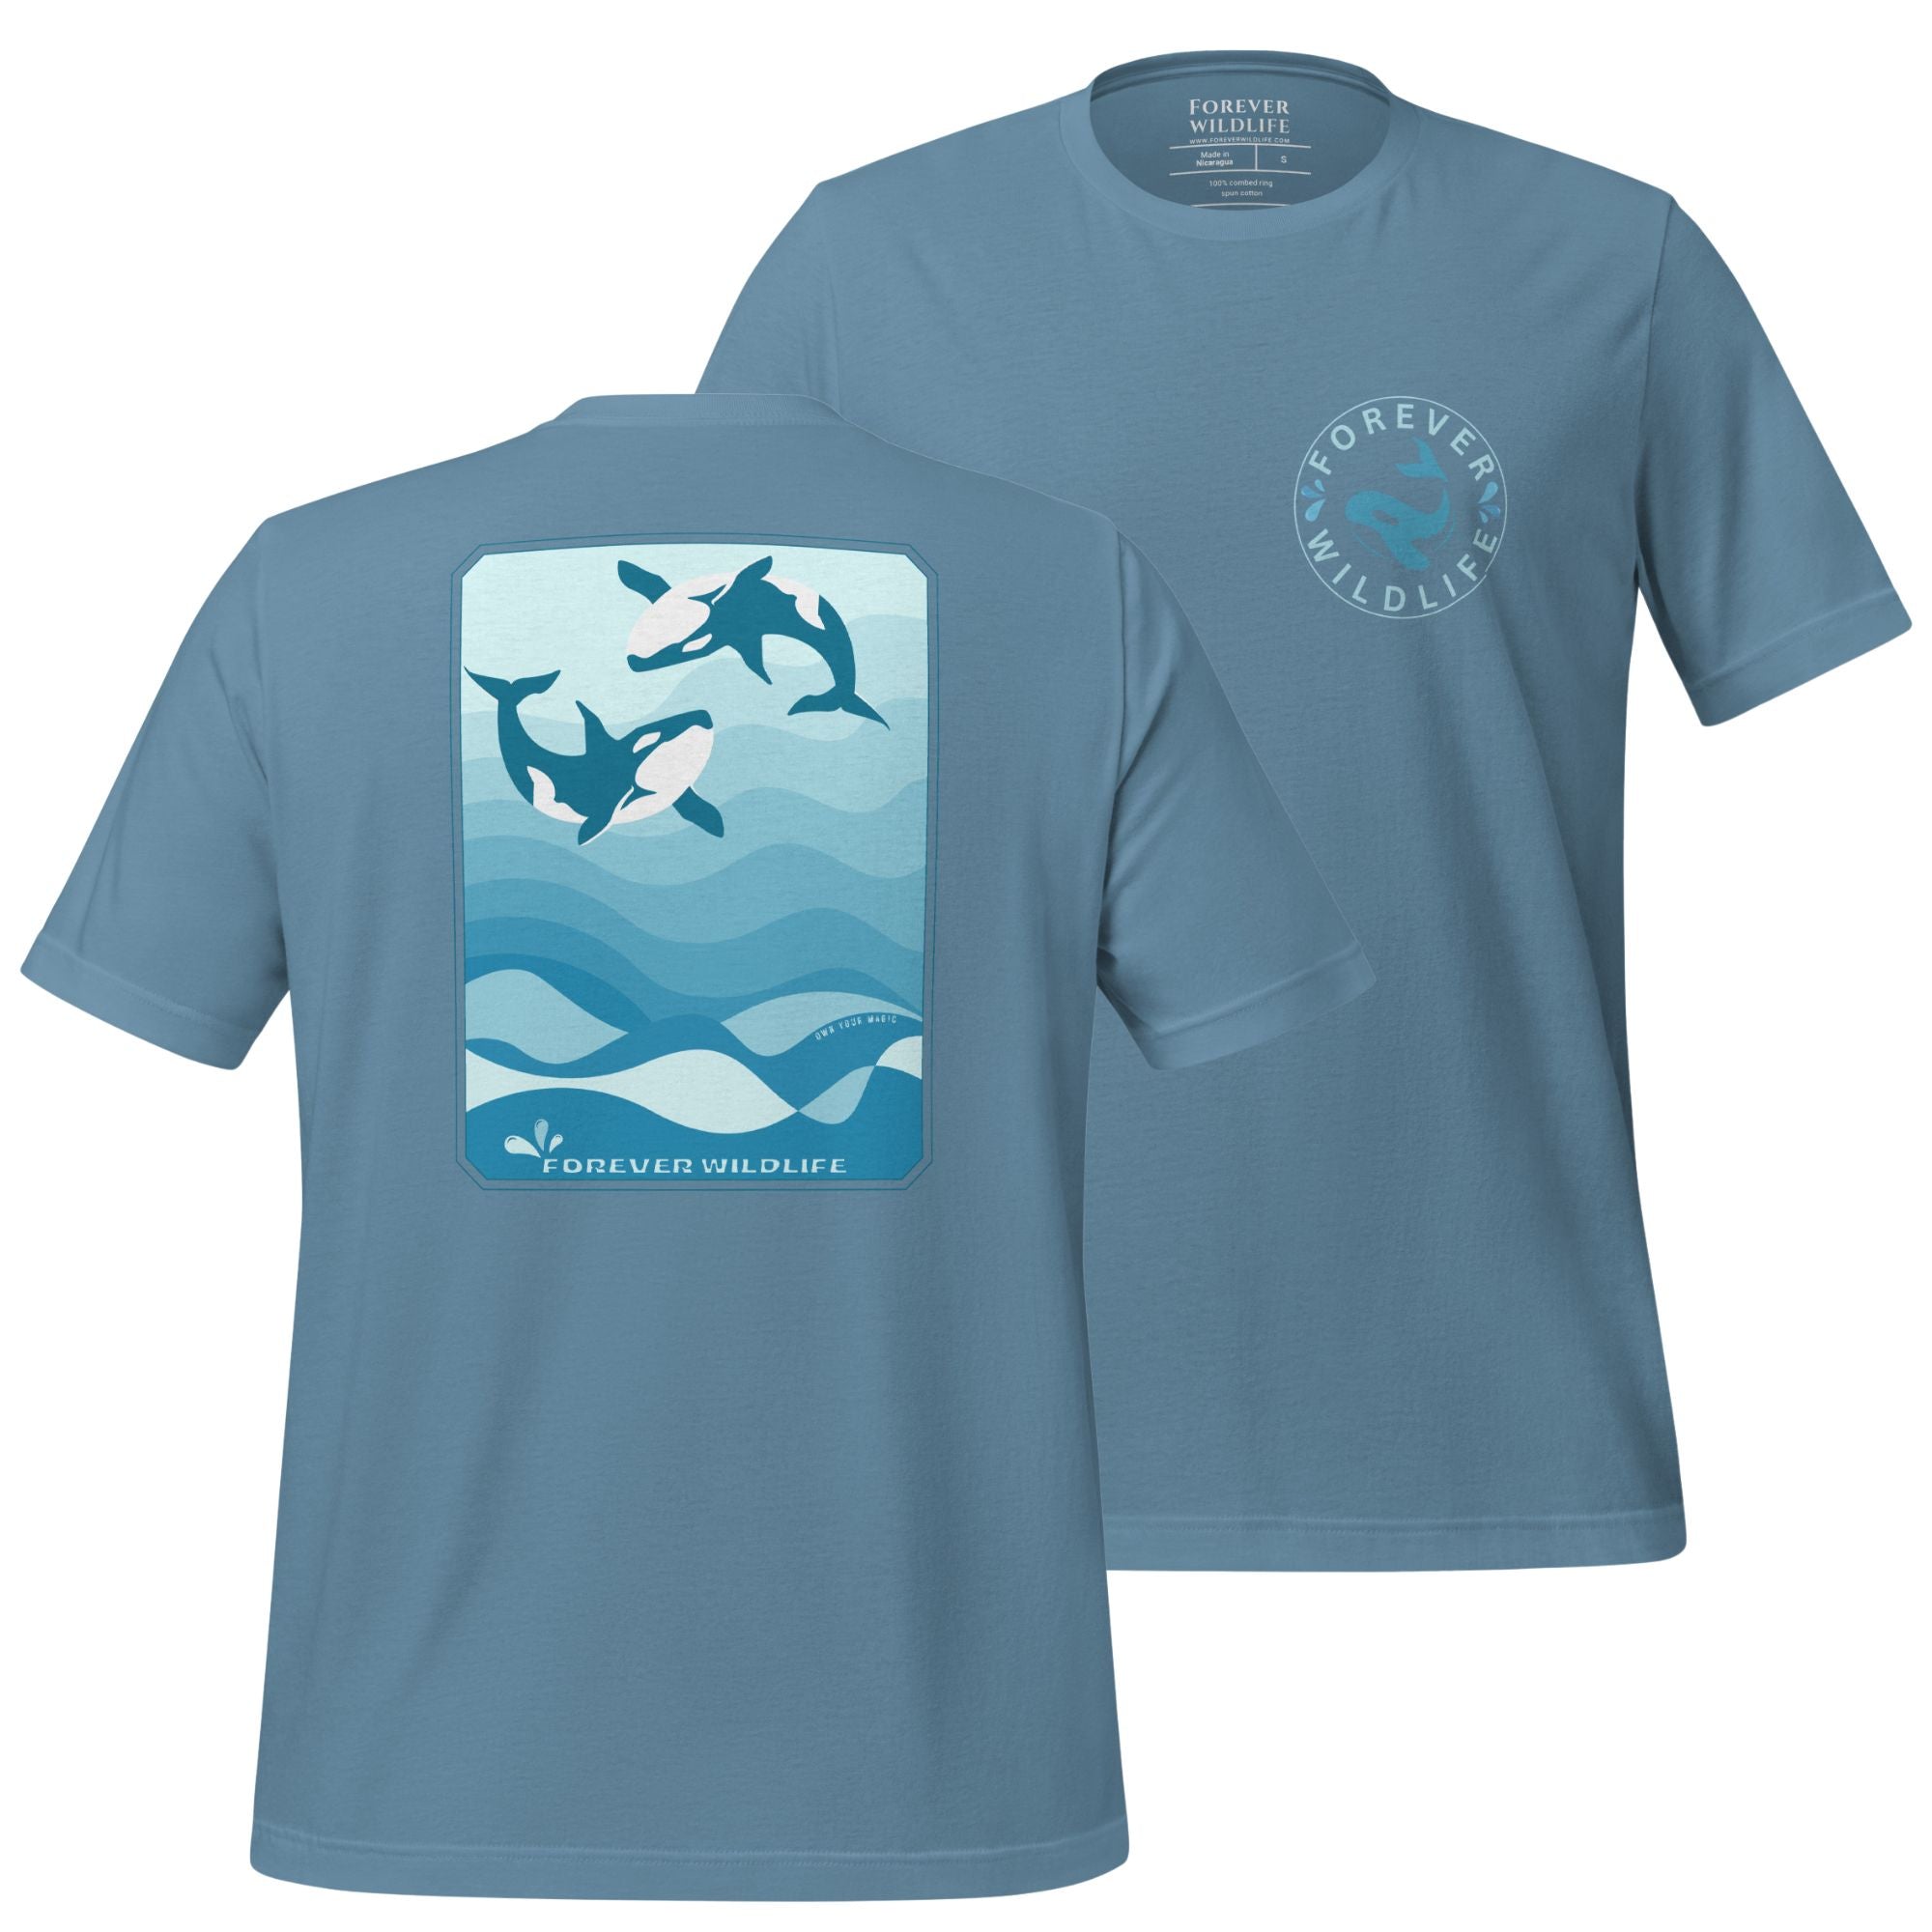 Orca Shirt, beautiful Blue Steel Orca T-Shirt with Killer Whales on the shirt by Forever Wildlife selling Wildlife T Shirts.